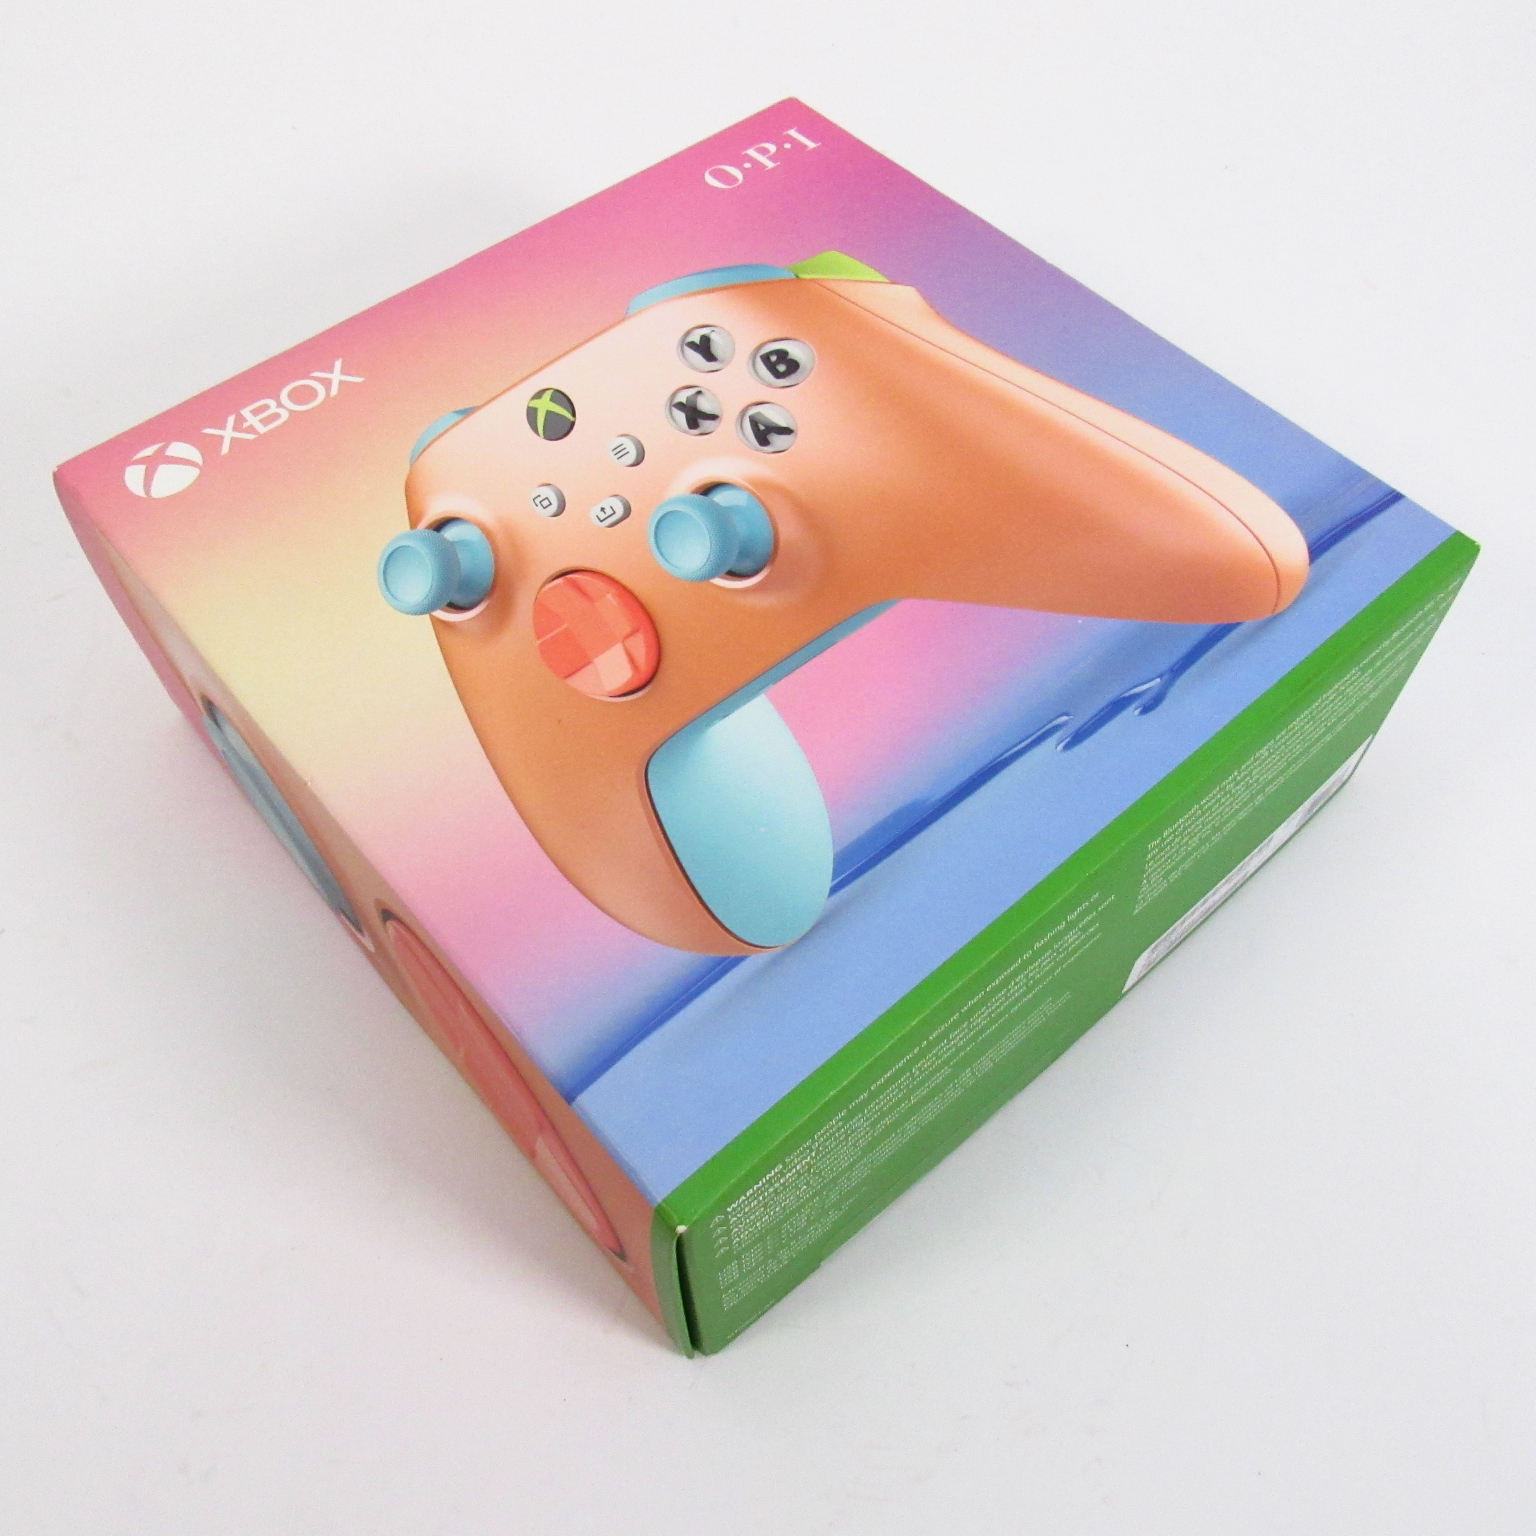 Microsoft 1914 - Special Wireless Controller Sunkissed Edition Xbox Vibes O.P.I